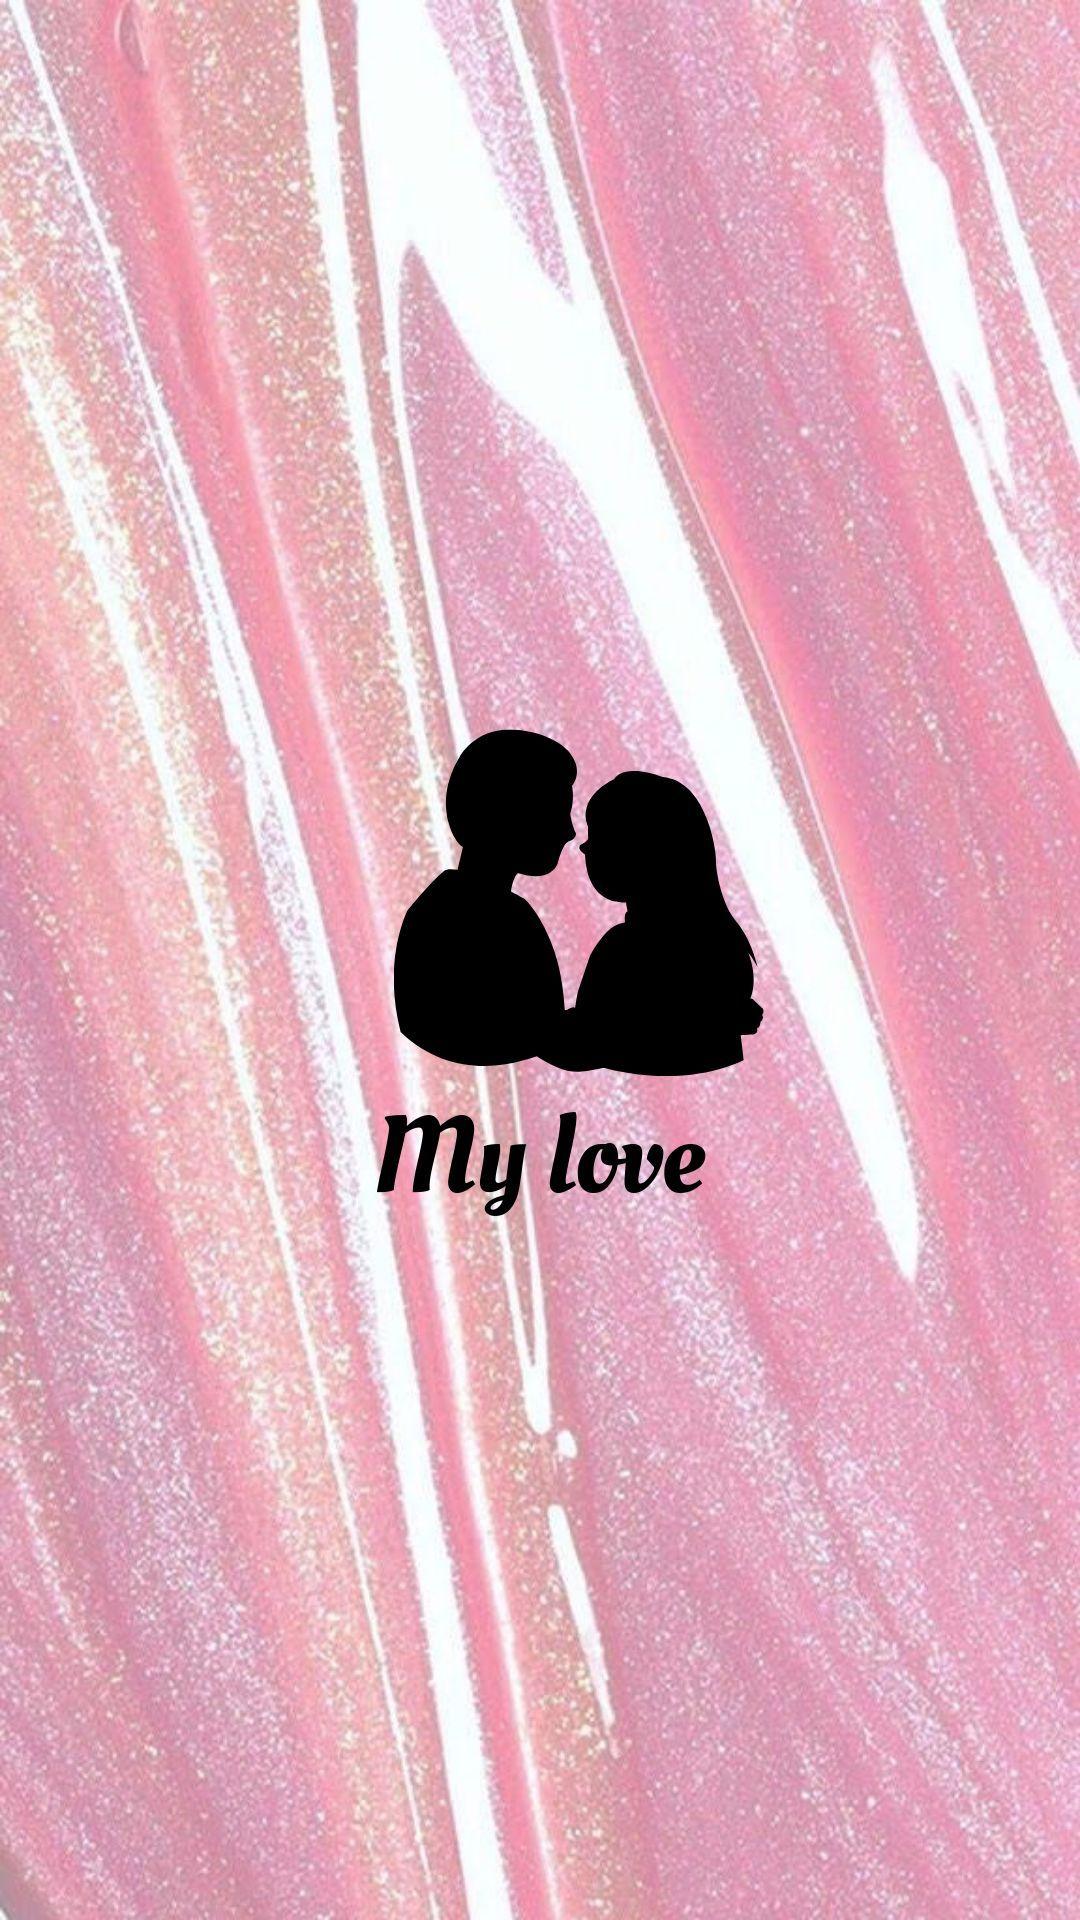 instagram #highlights #wallpaper #pinky #pink #mylove #couple